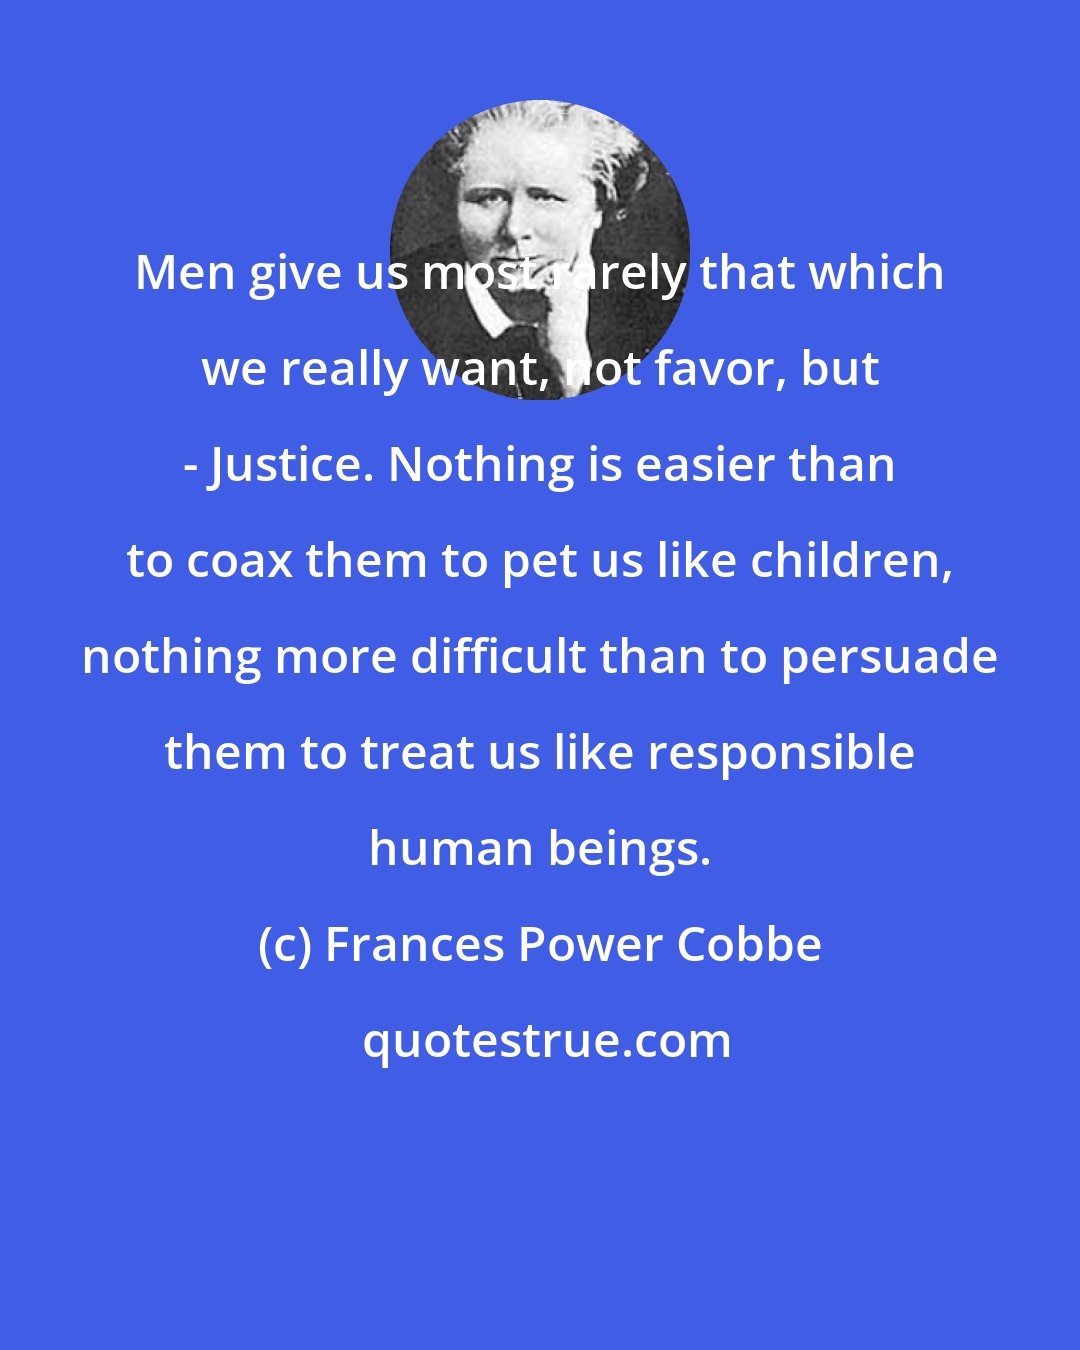 Frances Power Cobbe: Men give us most rarely that which we really want, not favor, but - Justice. Nothing is easier than to coax them to pet us like children, nothing more difficult than to persuade them to treat us like responsible human beings.